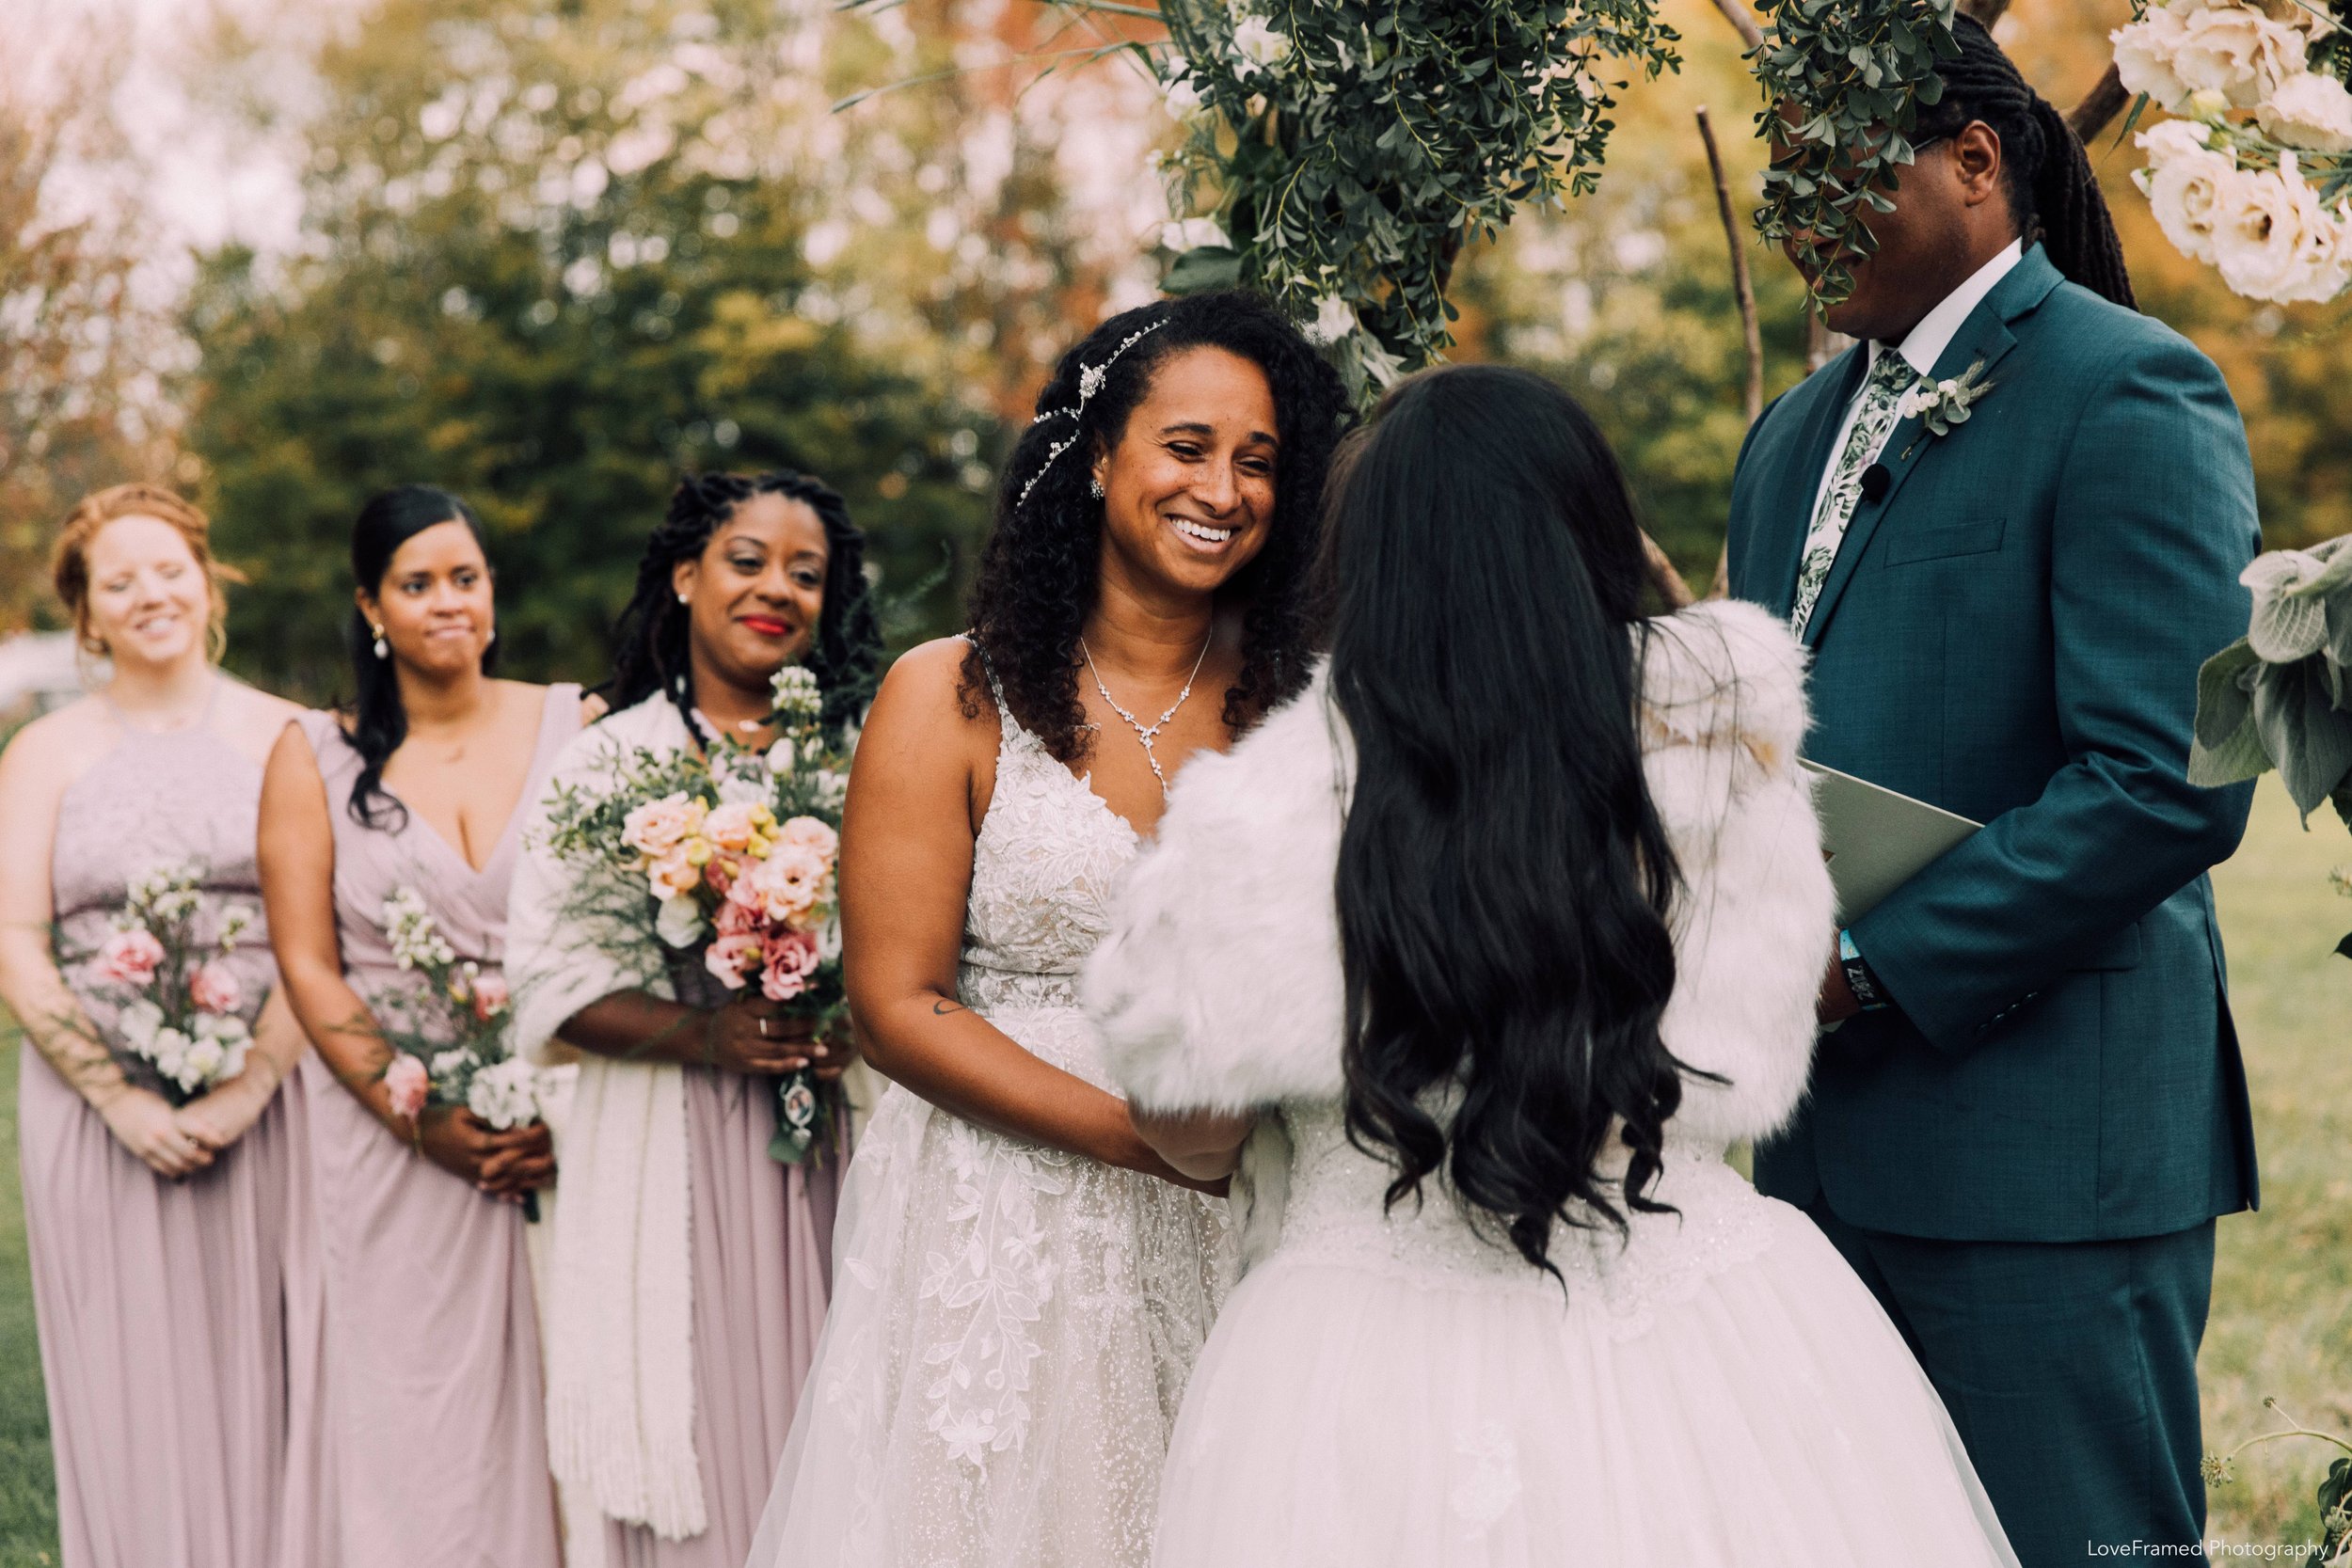 Two brides exchanging their vows surrounded by the officiant and bridesmaids